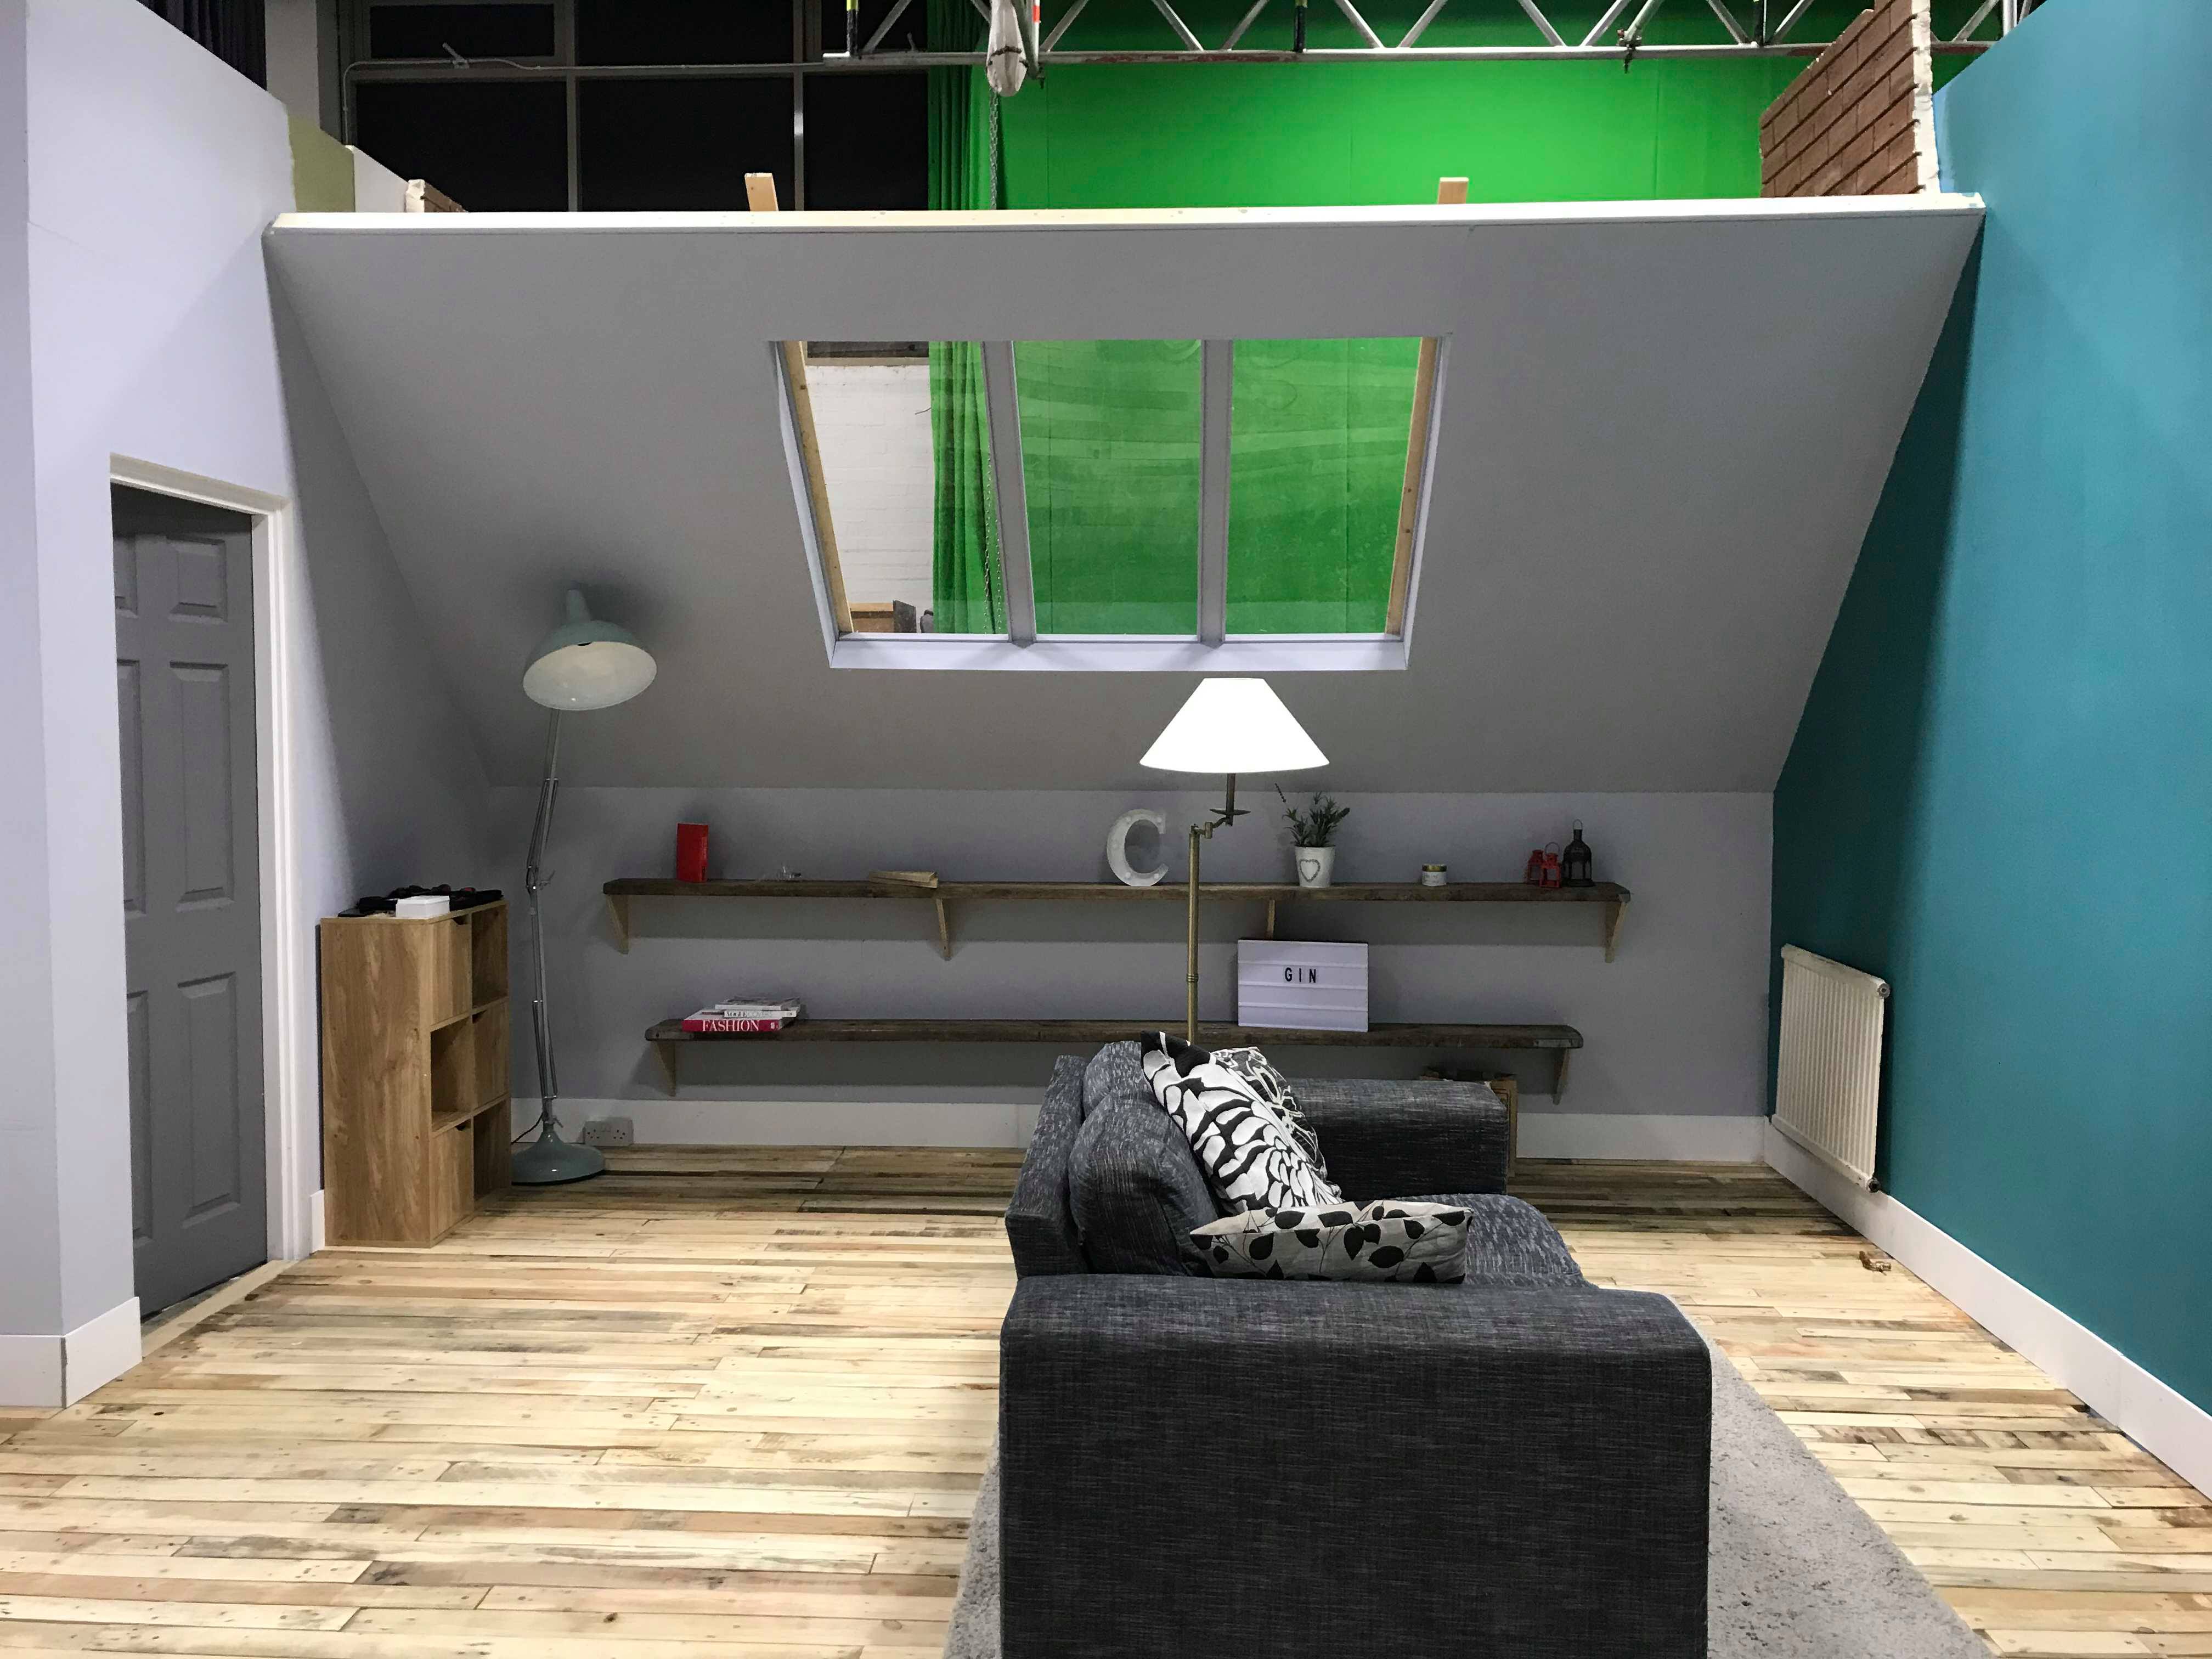 Interior set design of a living room with a sofa and shelves. Green screen in background.